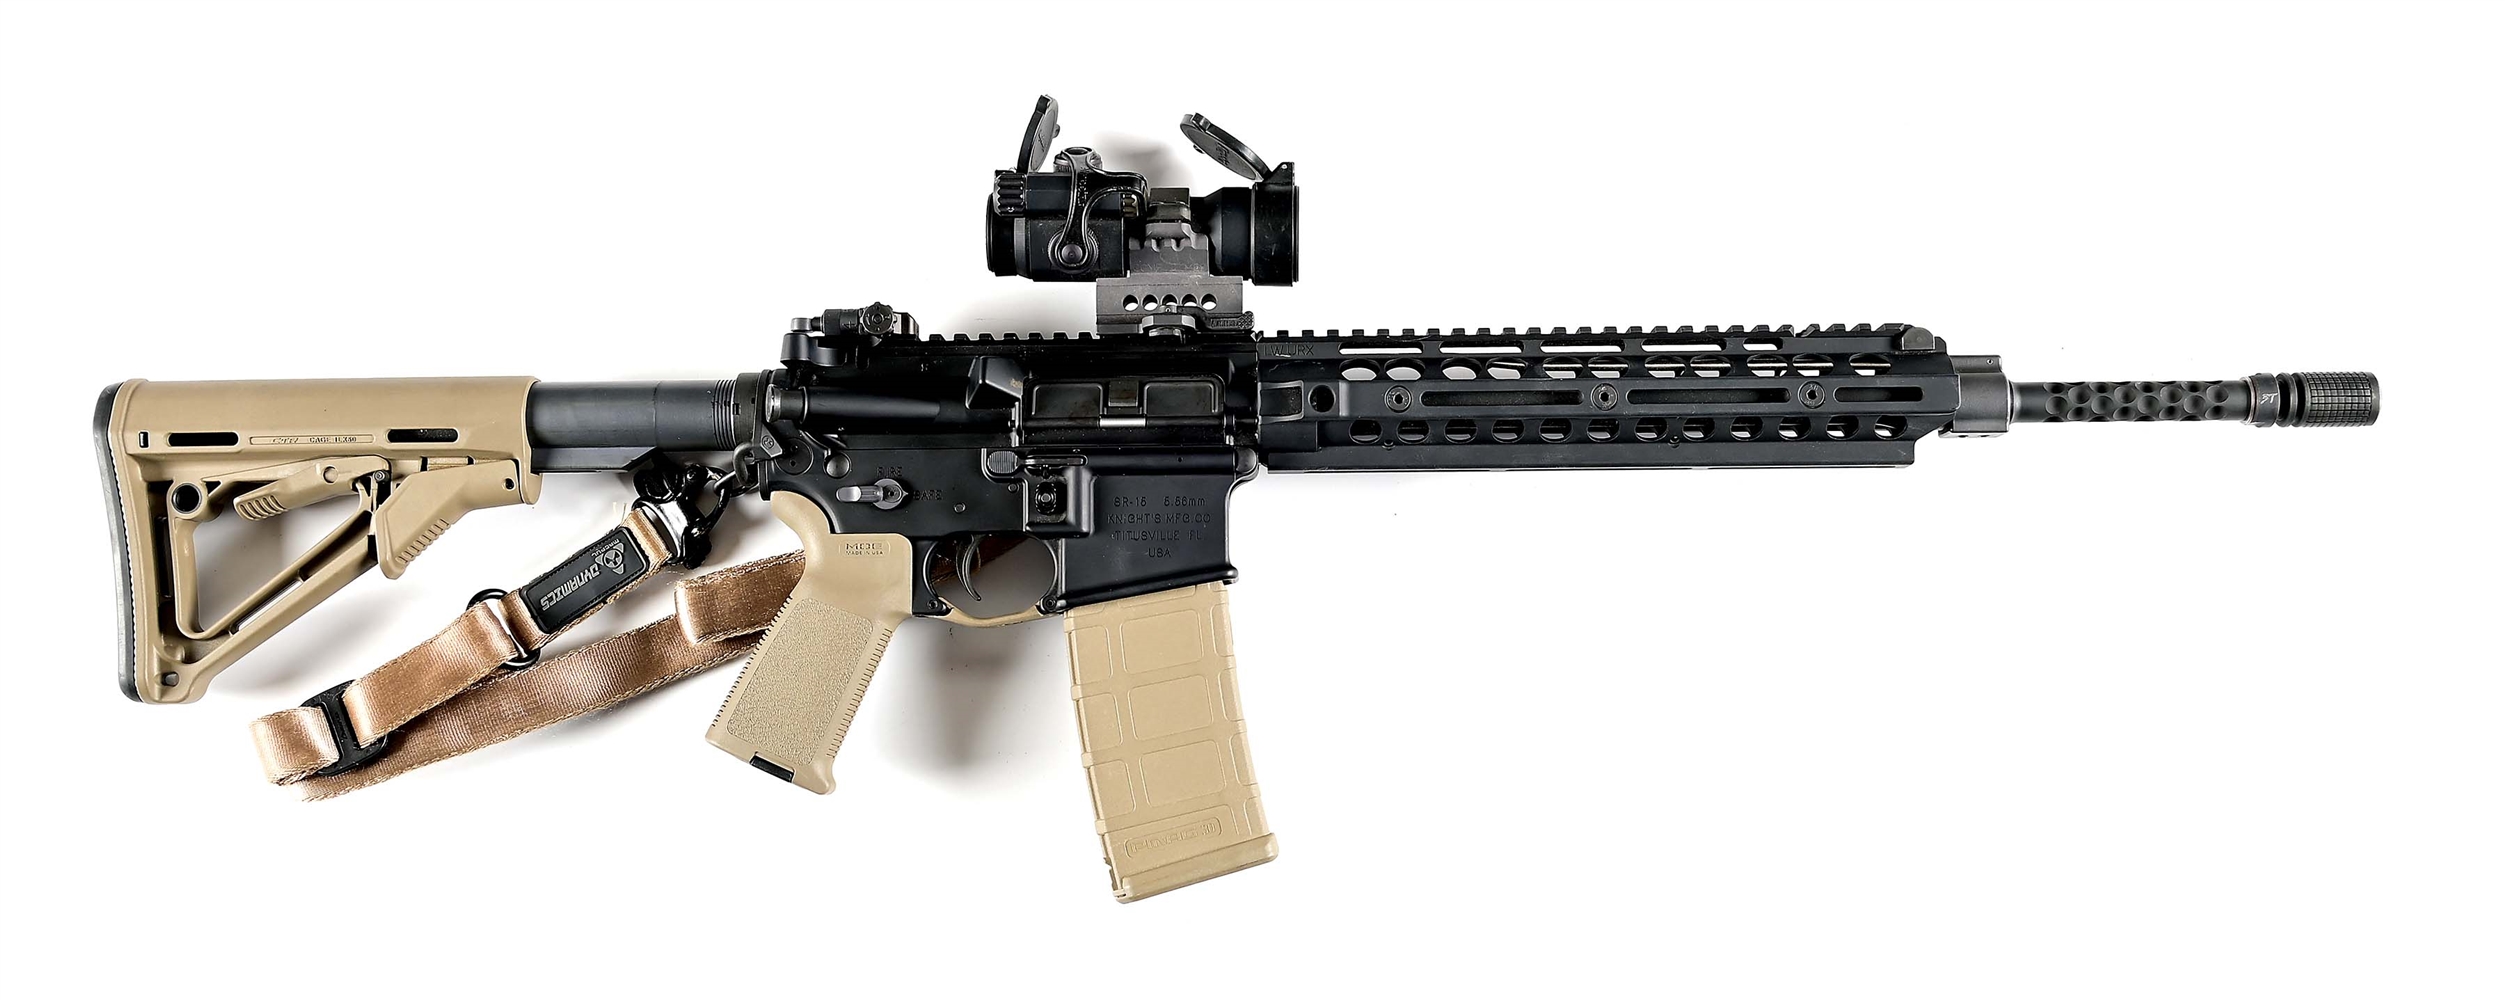 (M) KNIGHTS MANUFACTURING SR-15E3 SEMI AUTOMATIC RIFLE MAGPUL DYNAMICS EDITION WITH CASE.